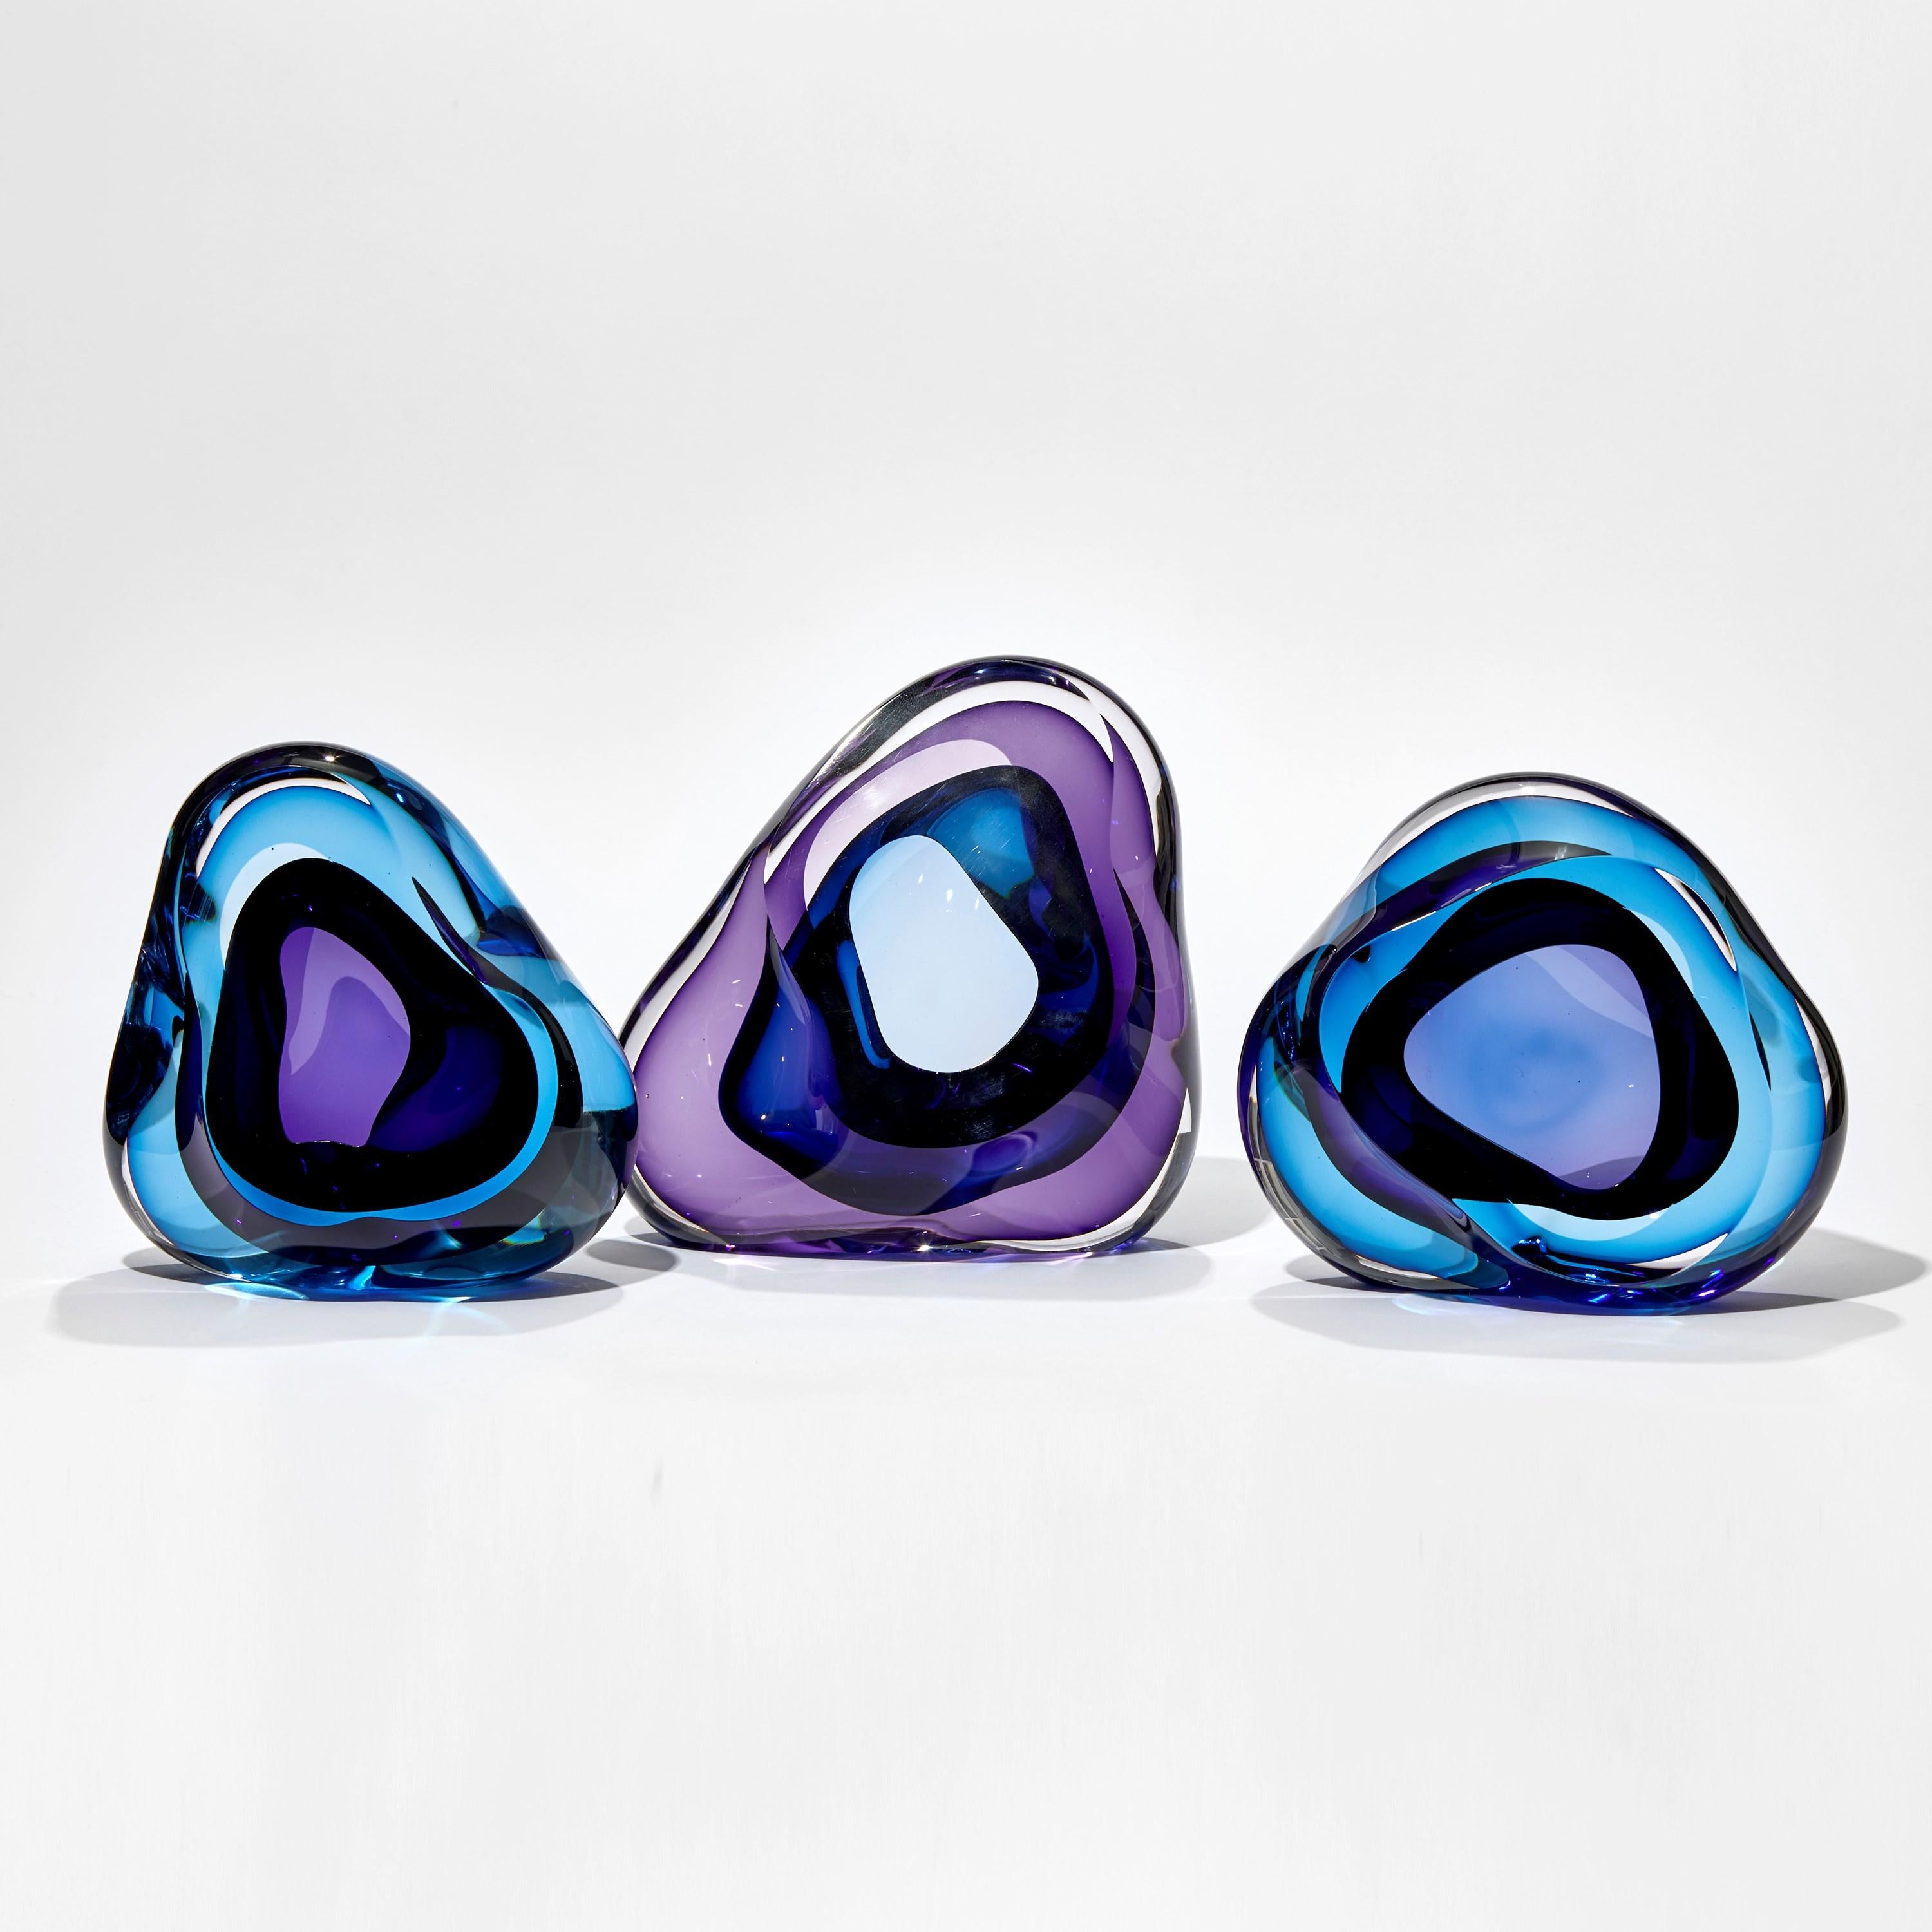 Organic Modern Vug in Turquoise and Purple II, Glass Geode Sculpture by Samantha Donaldson